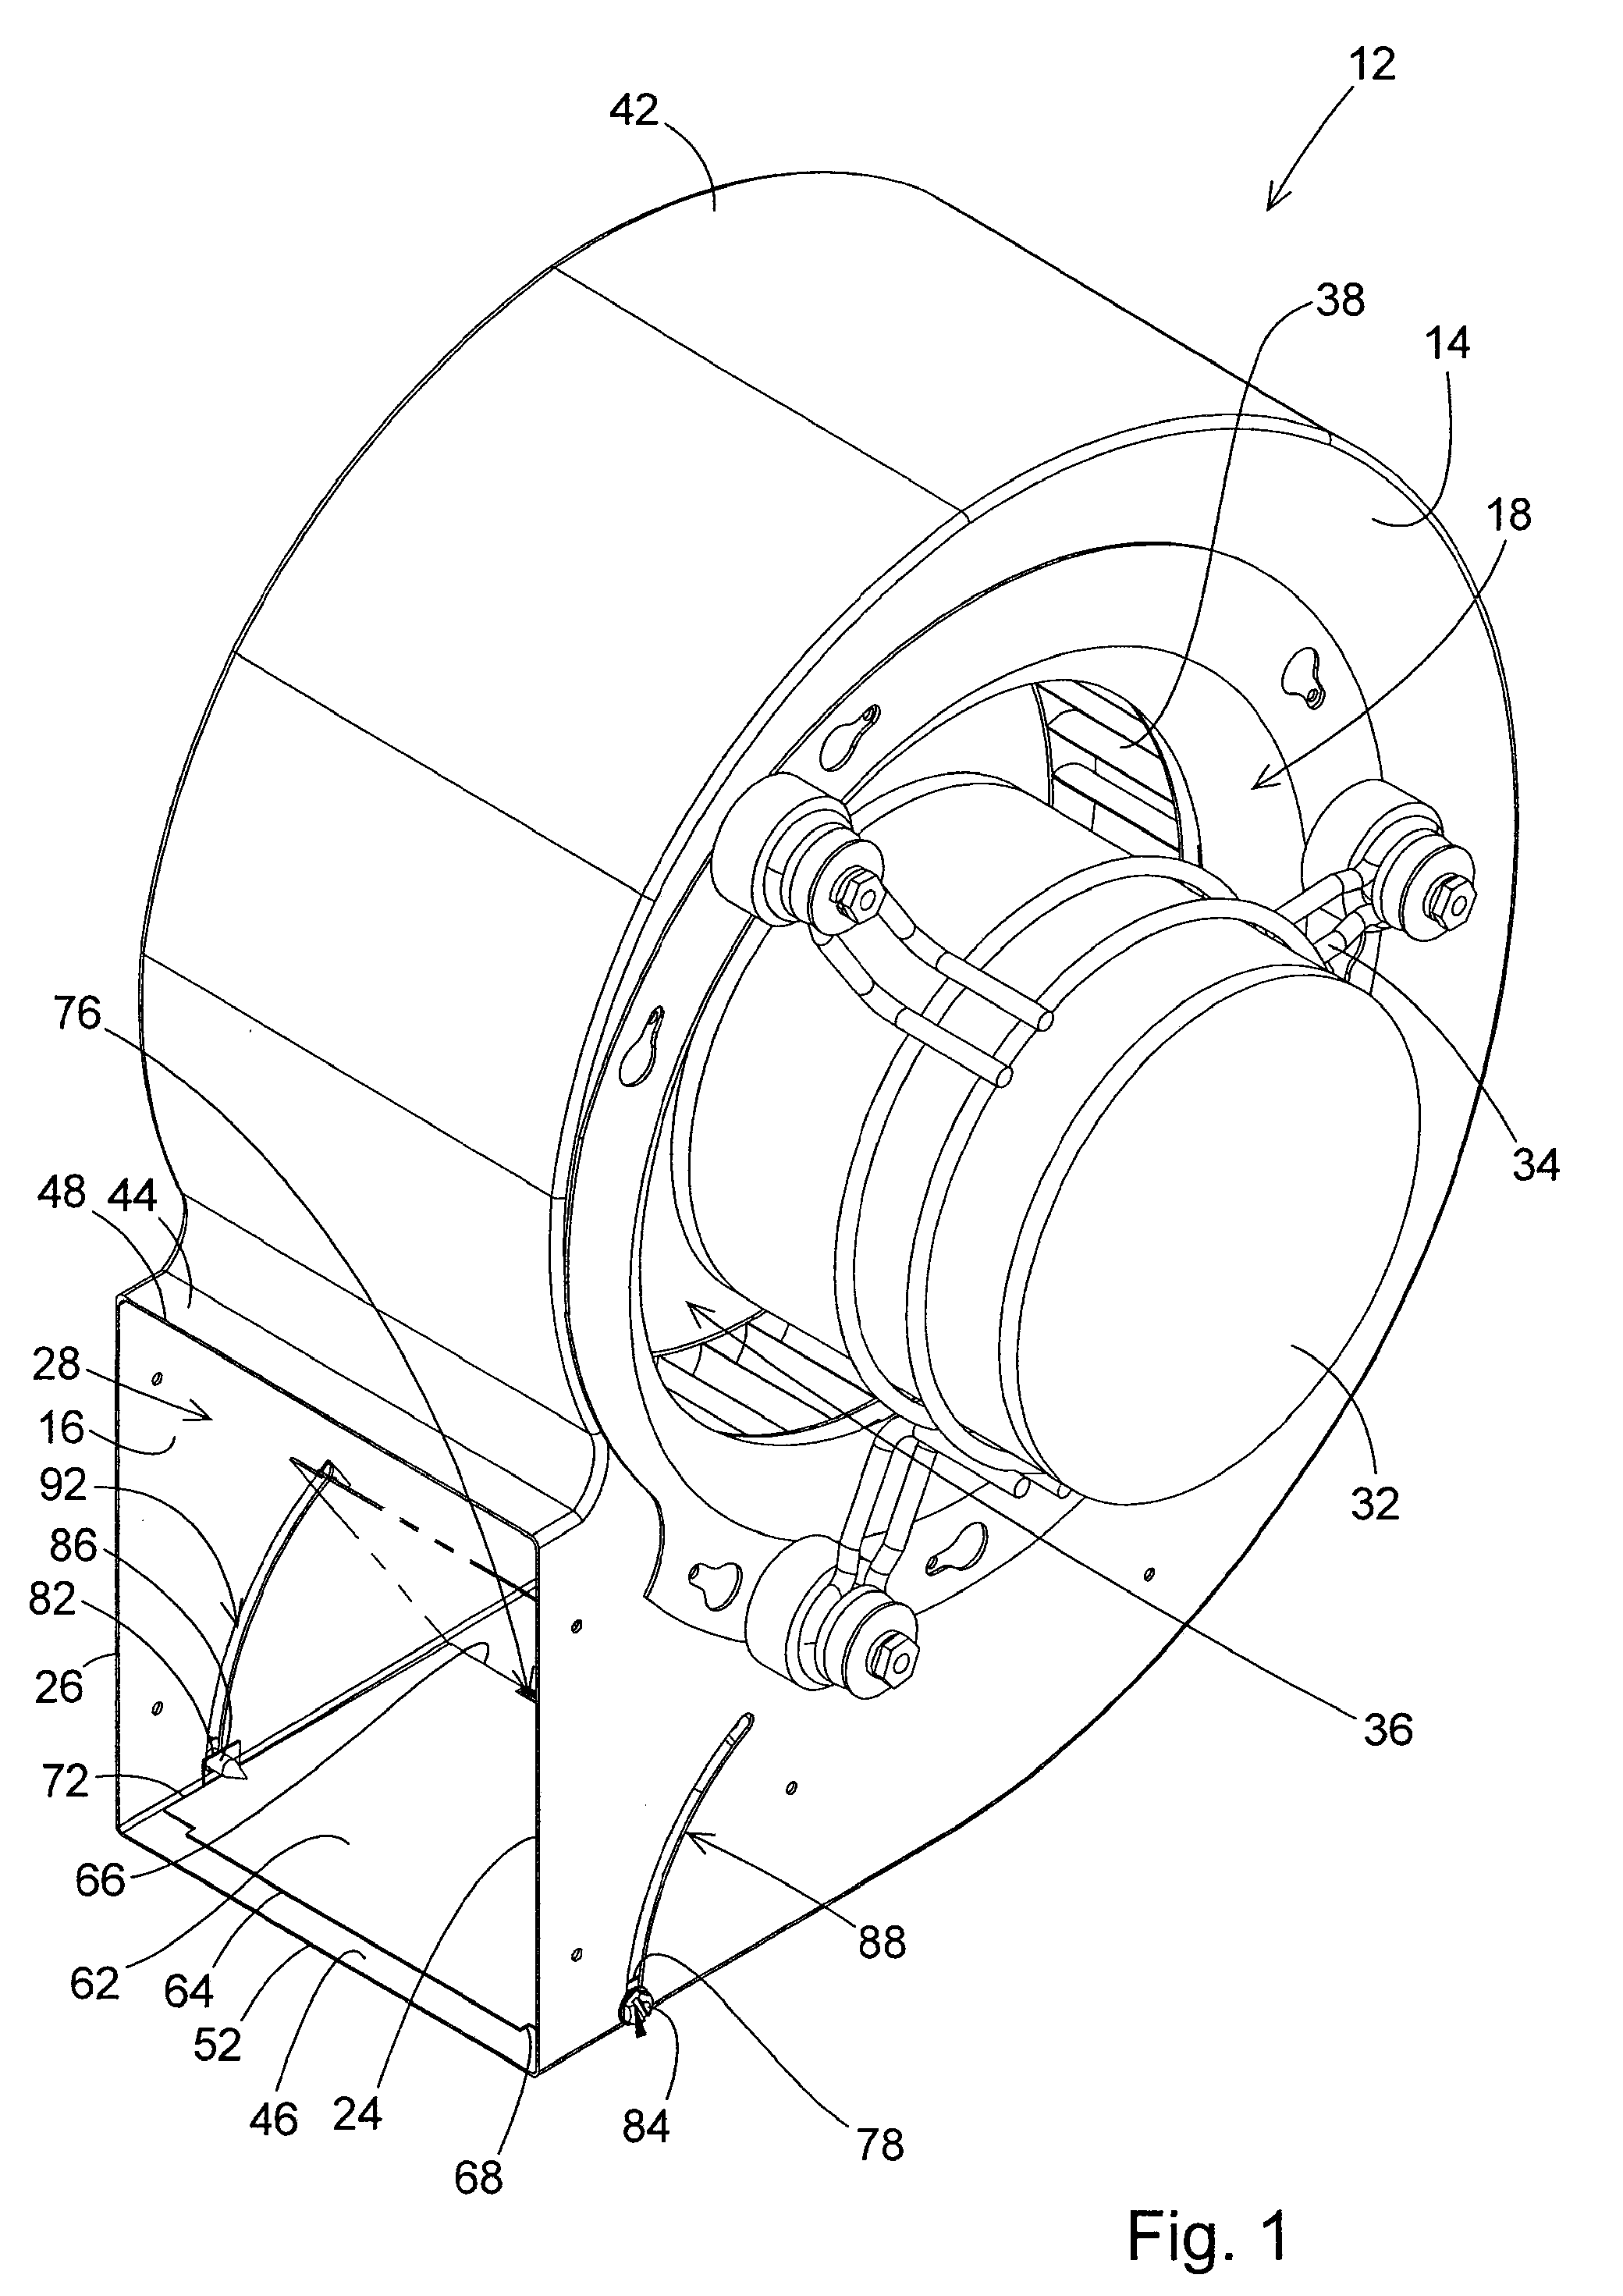 Air Distribution Blower Housing with Adjustable Restriction